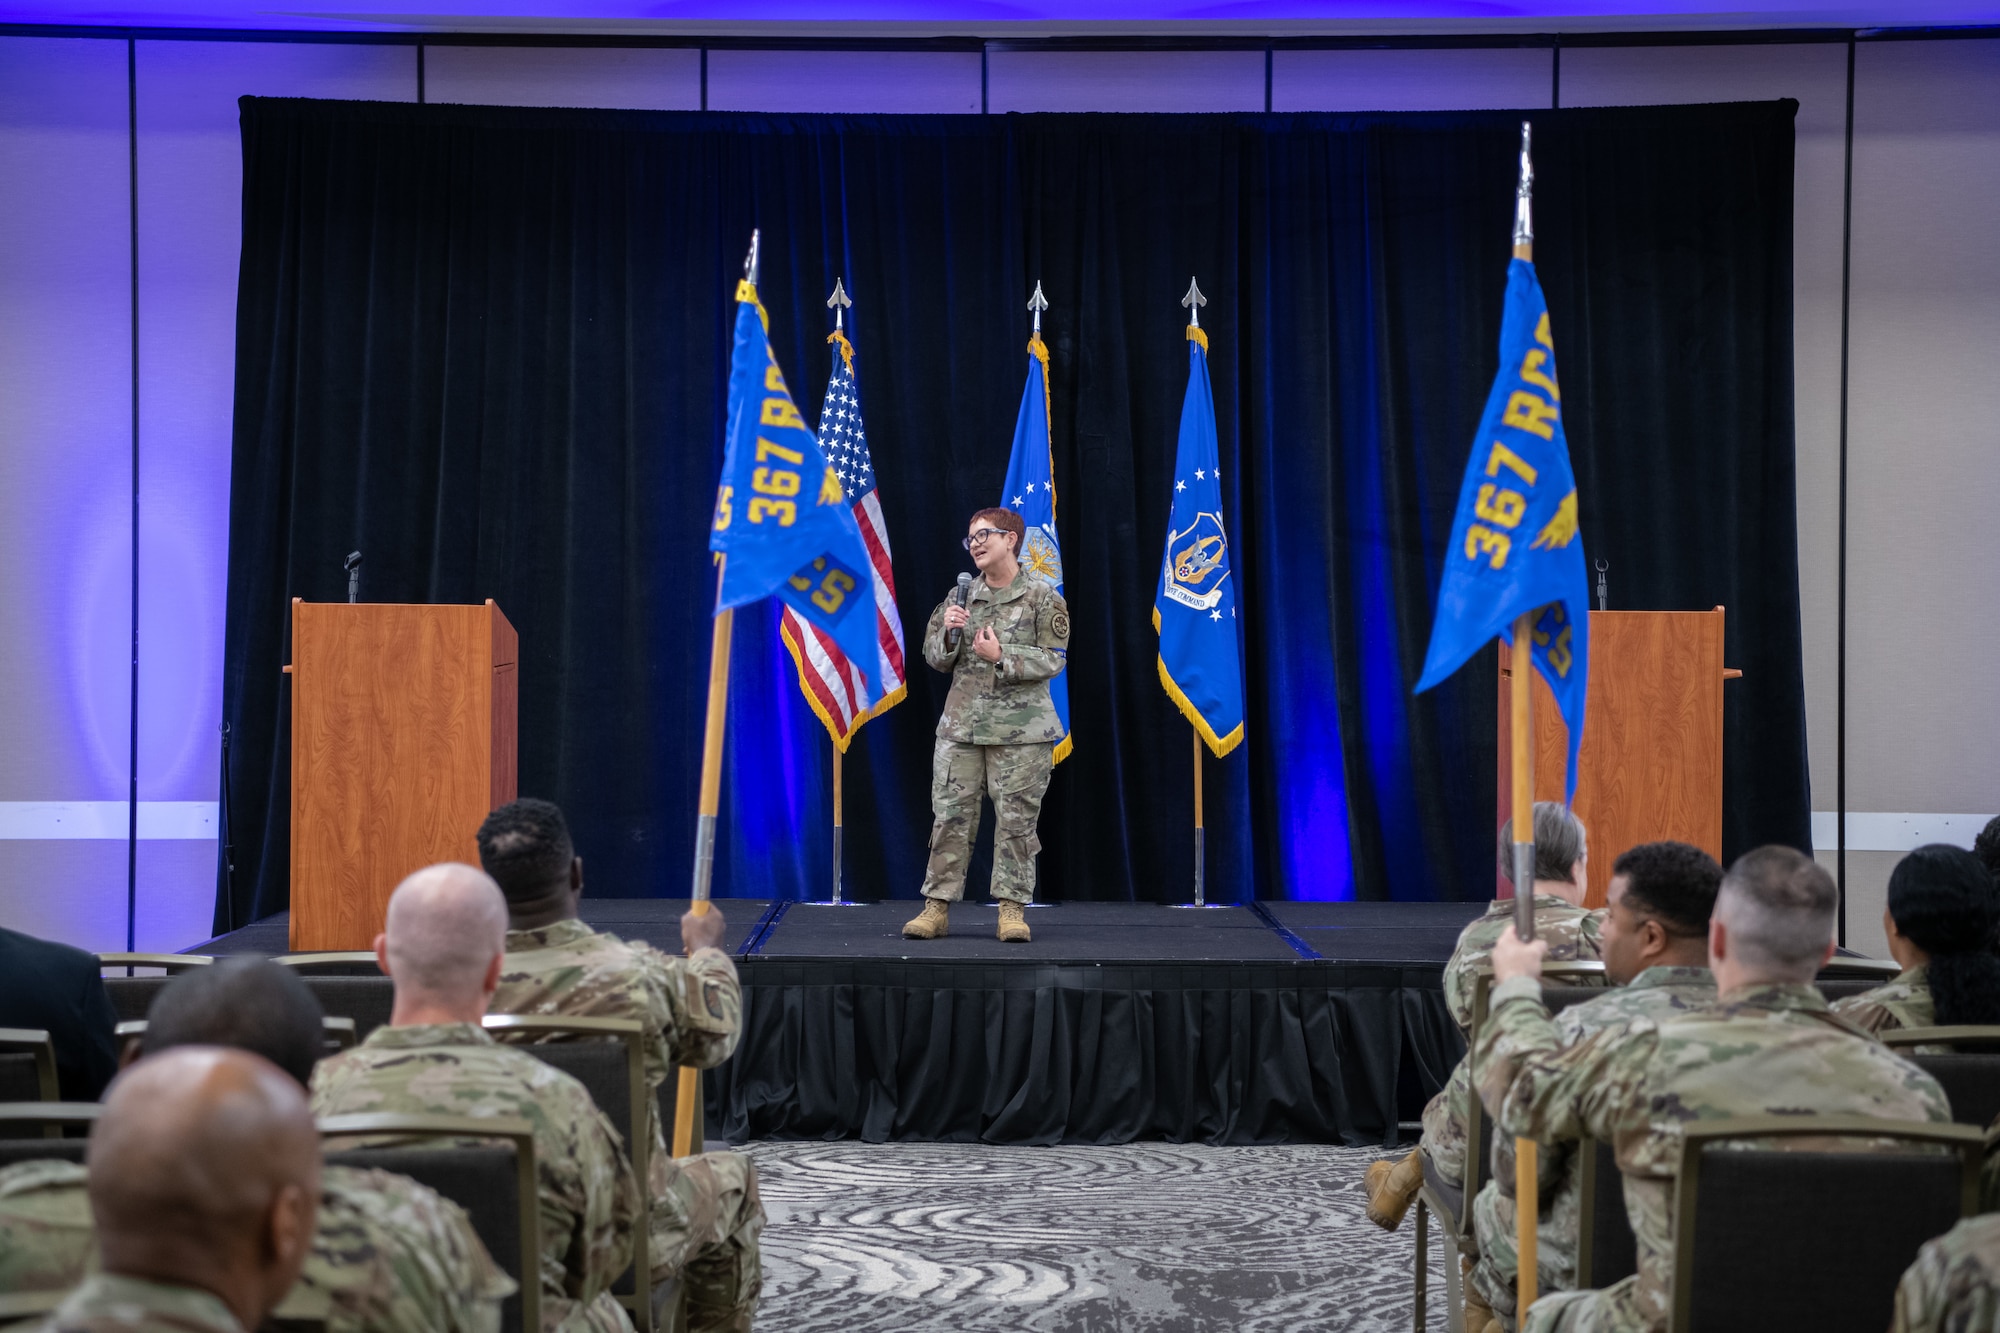 Chief Master Sgt. Jeanette Masters stands on a stage in front of recruiters and leadership